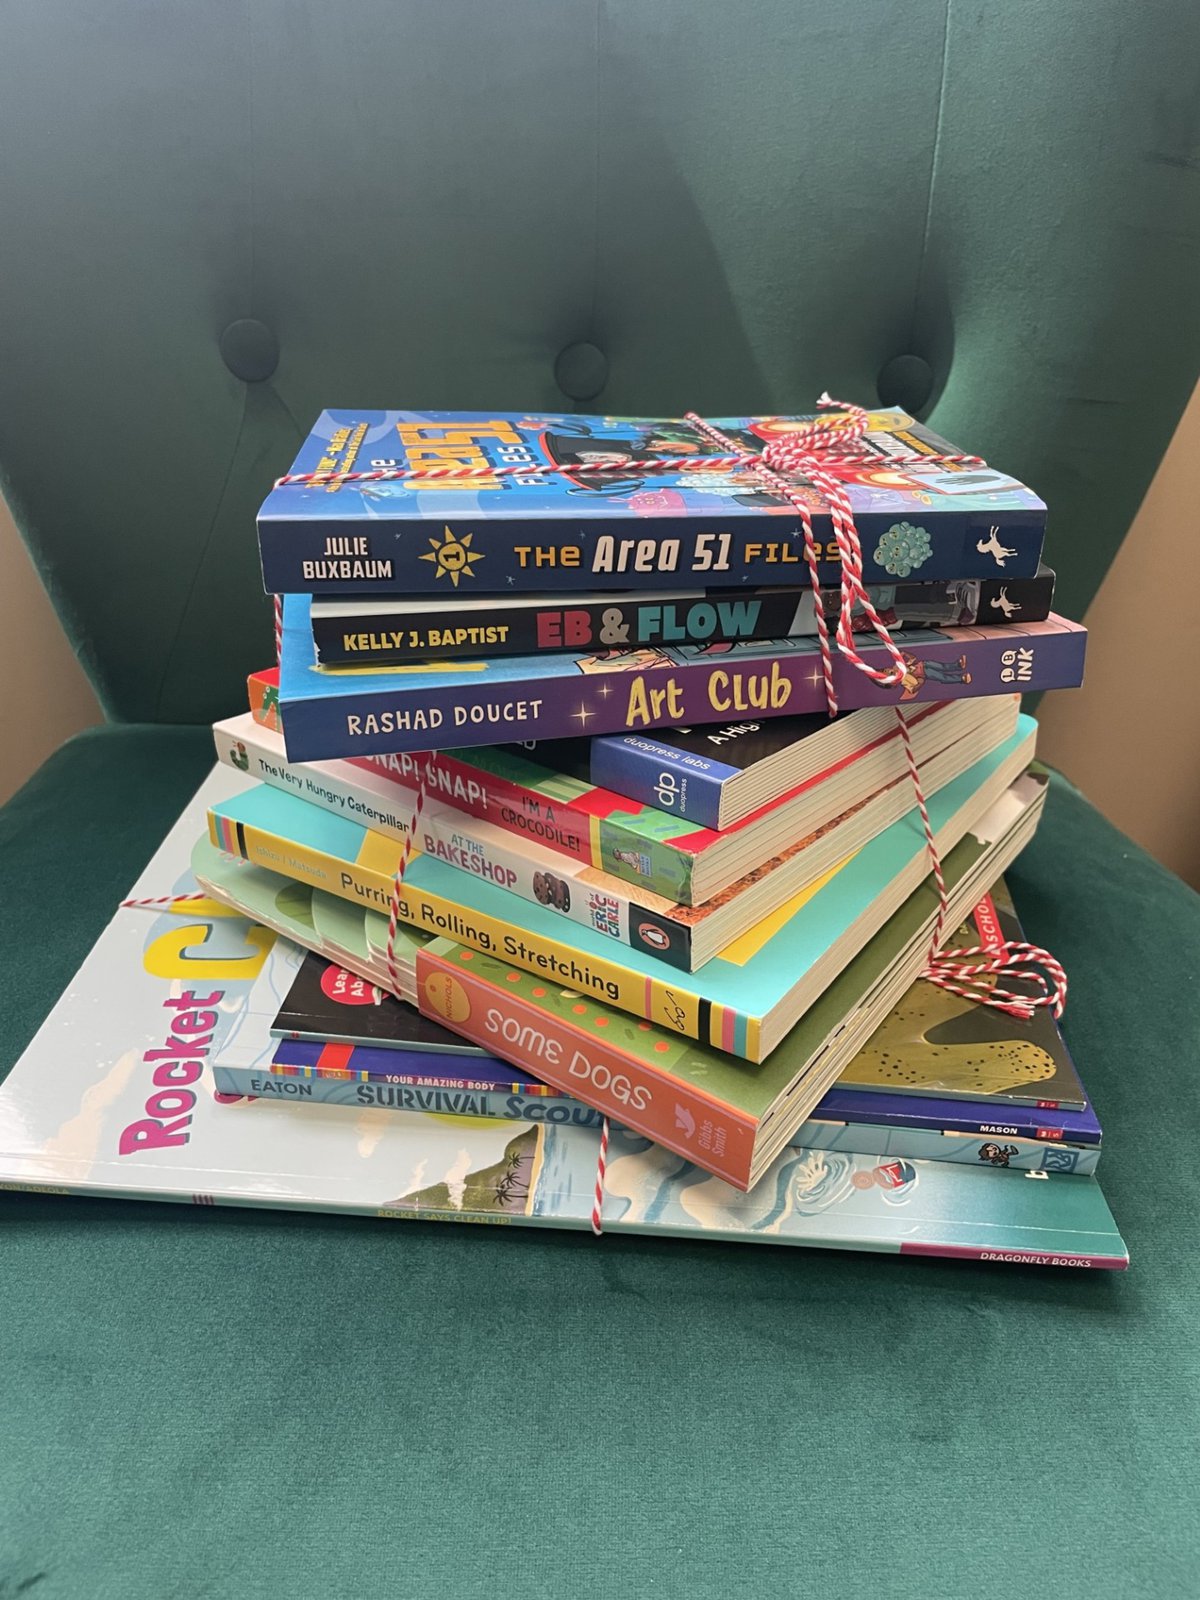 Homewood Rotary Club donates book packages to Homewood Public Library